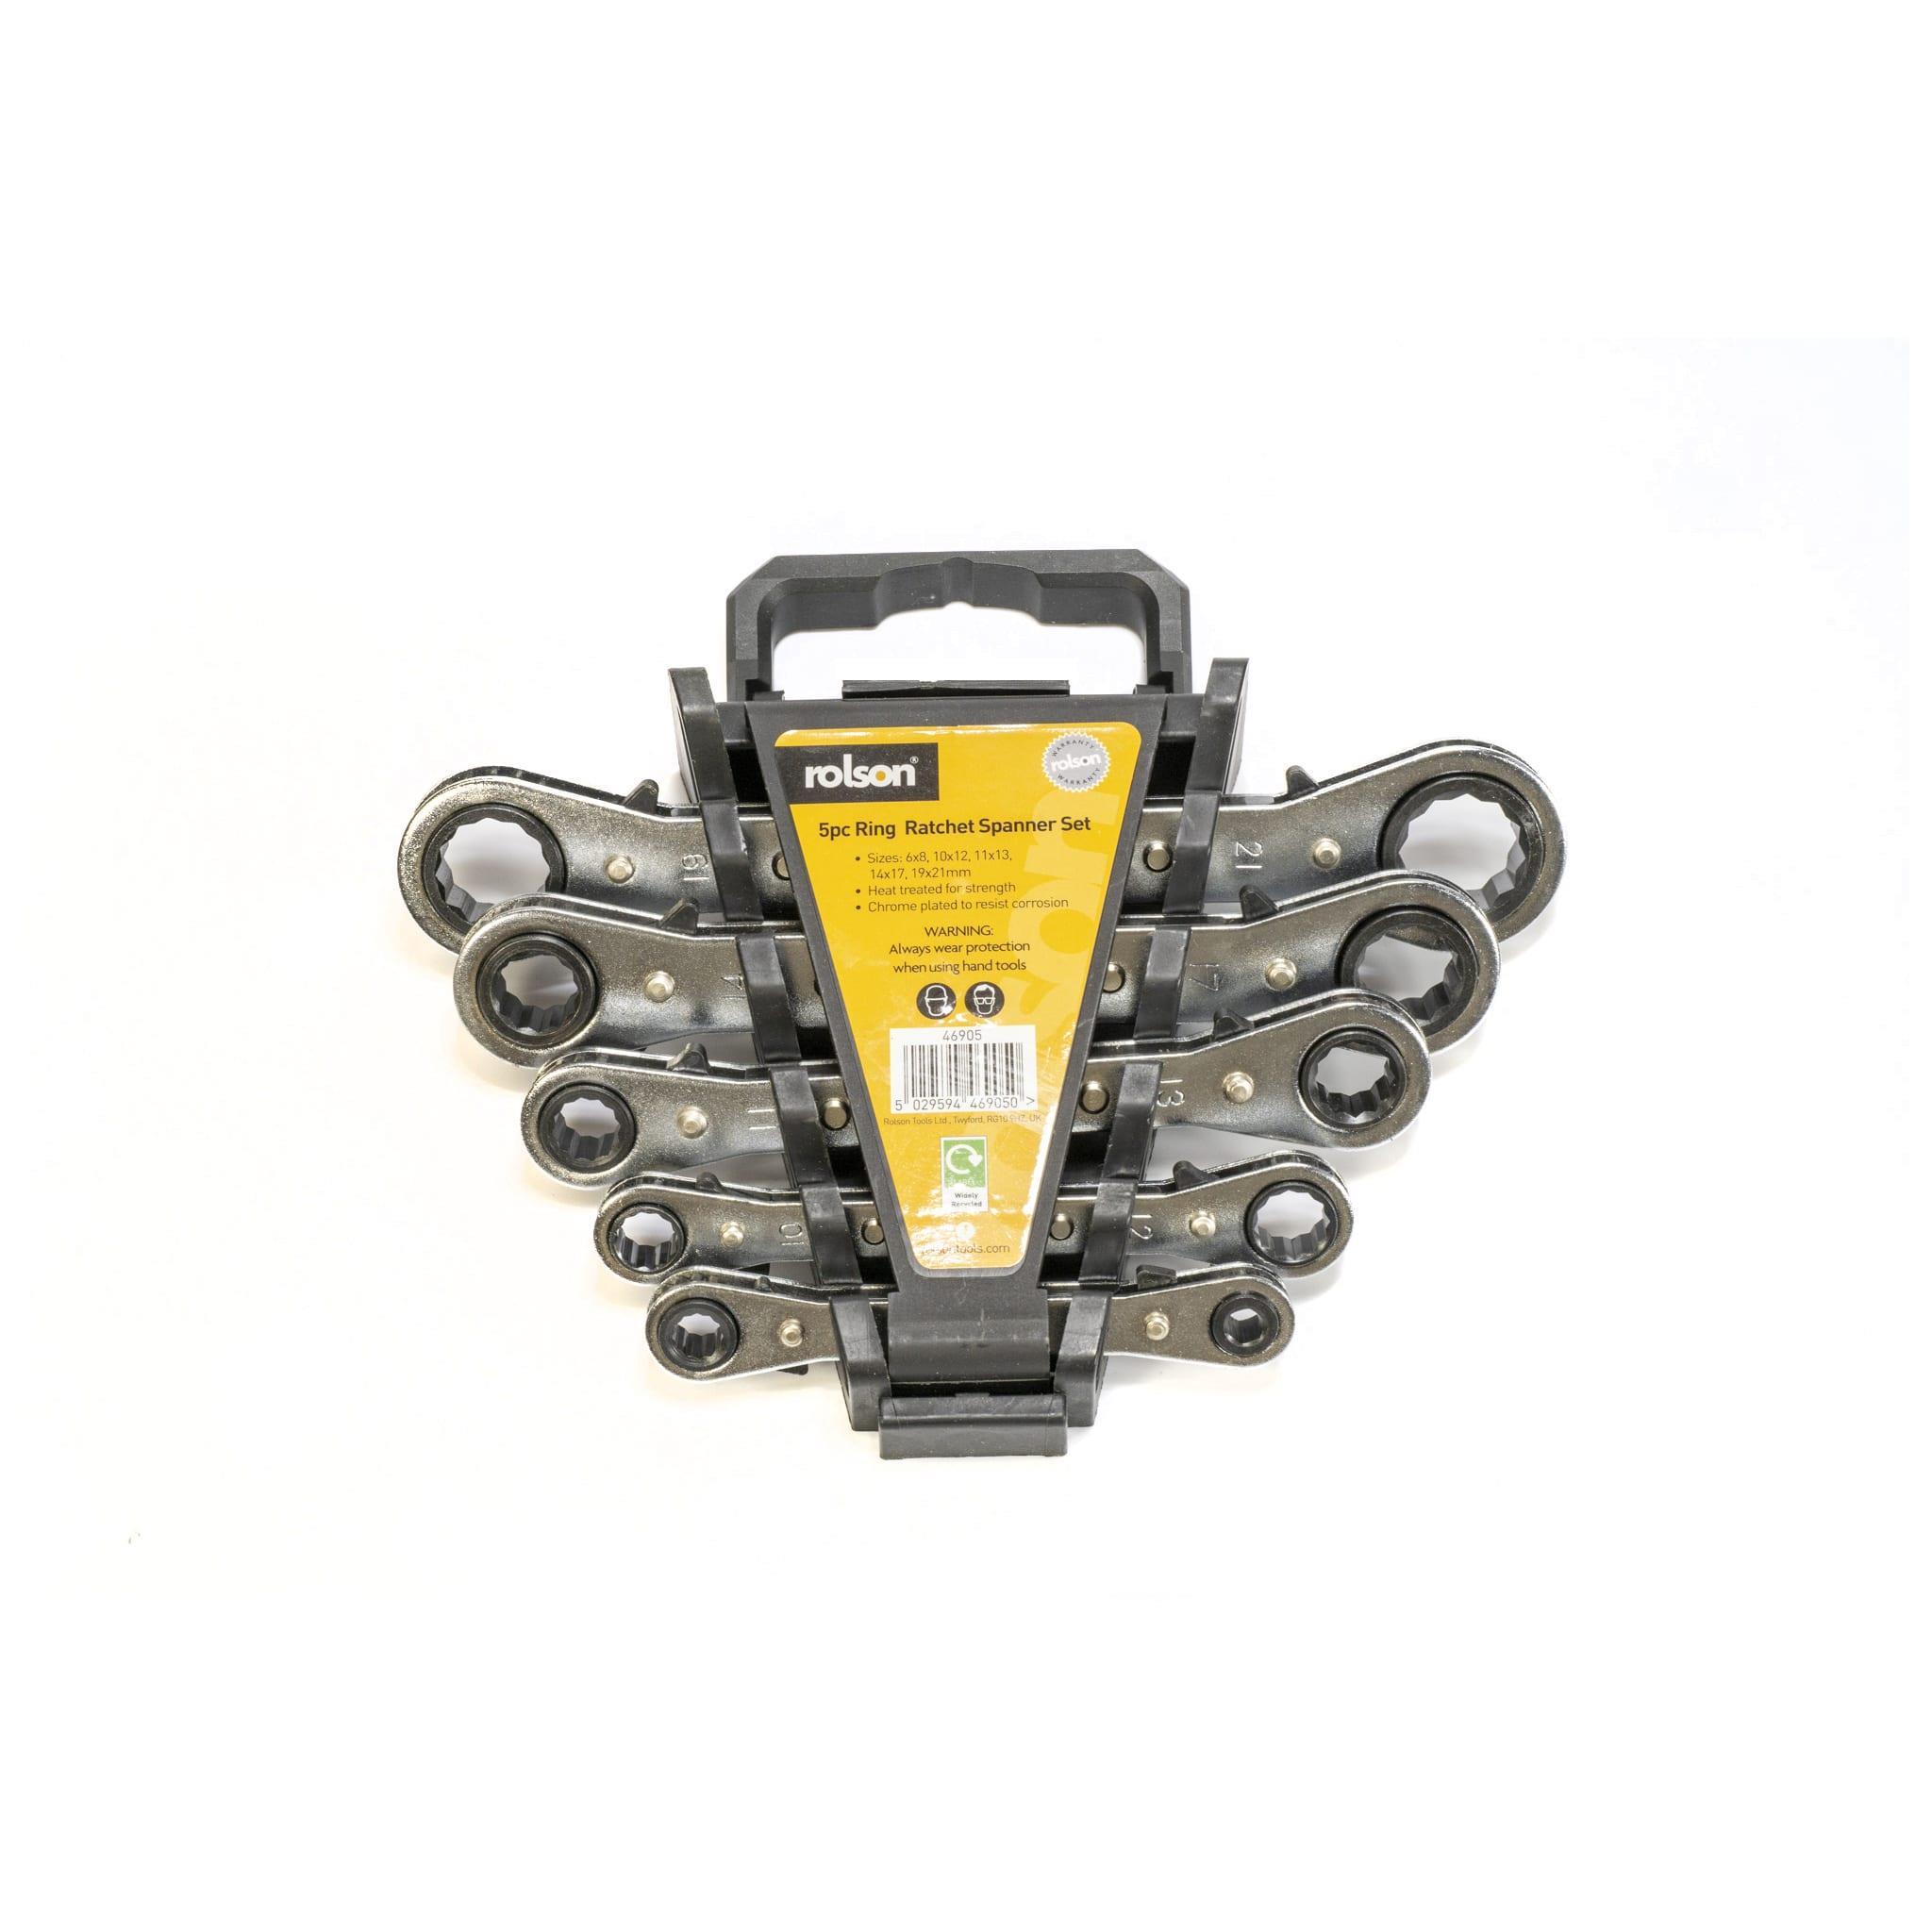 5 PIECE RATCHET RING SPANNERS  ROLSON